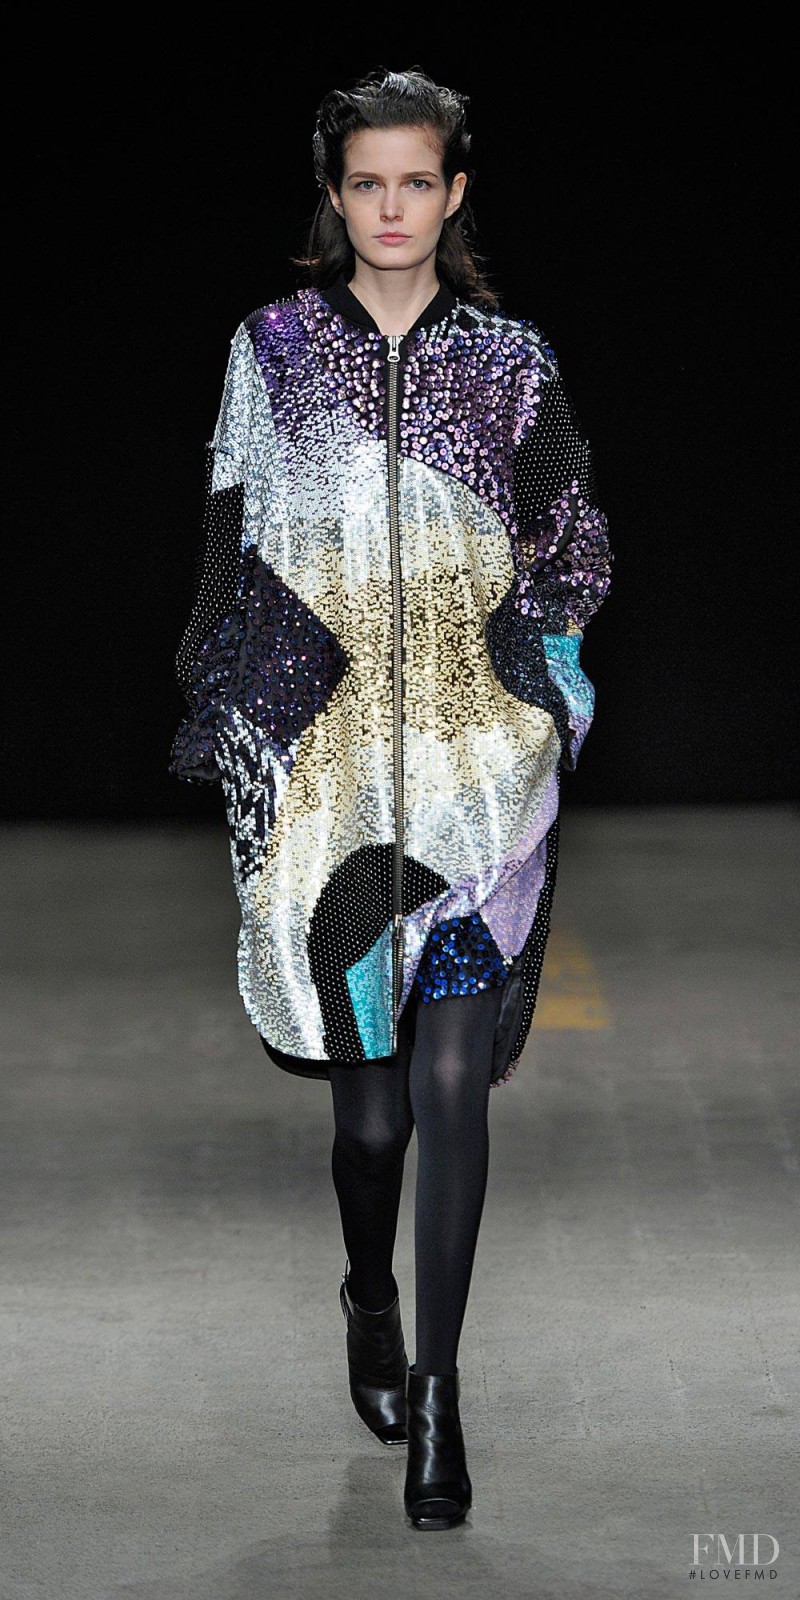 Zlata Mangafic featured in  the 3.1 Phillip Lim fashion show for Autumn/Winter 2014